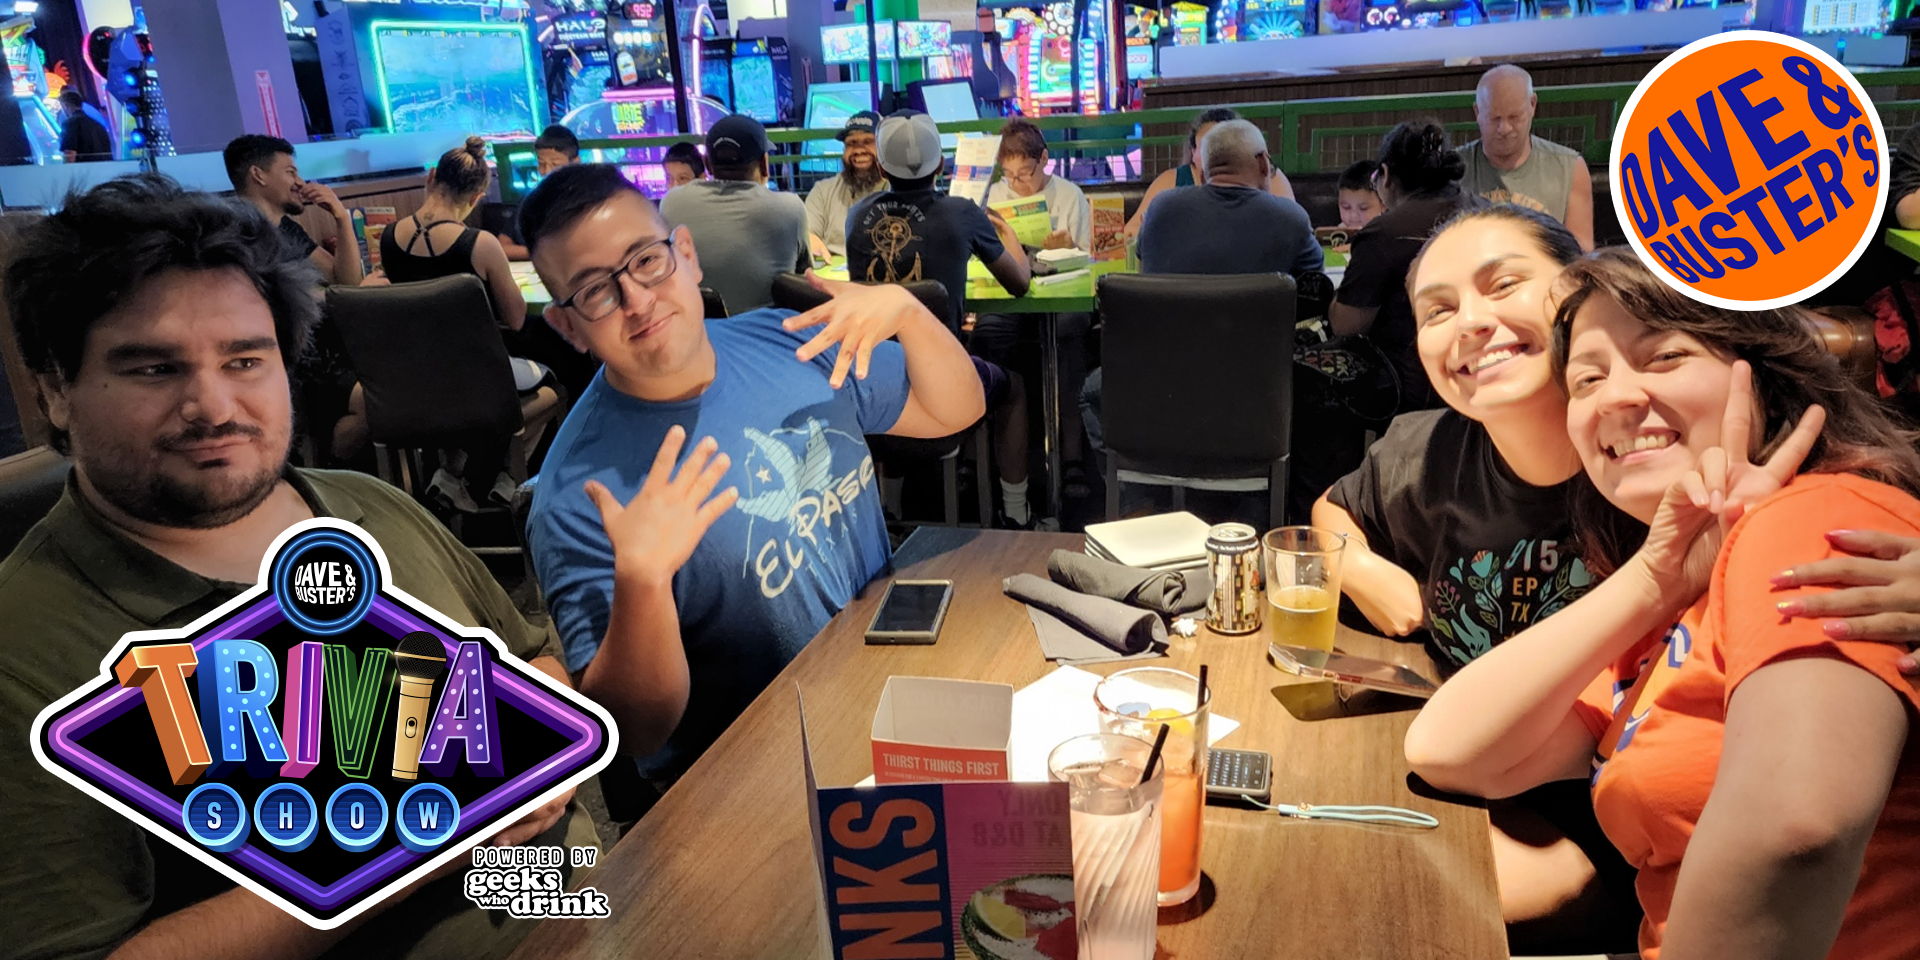 Geeks Who Drink Trivia Night at Dave & Buster's - Bellevue promotional image